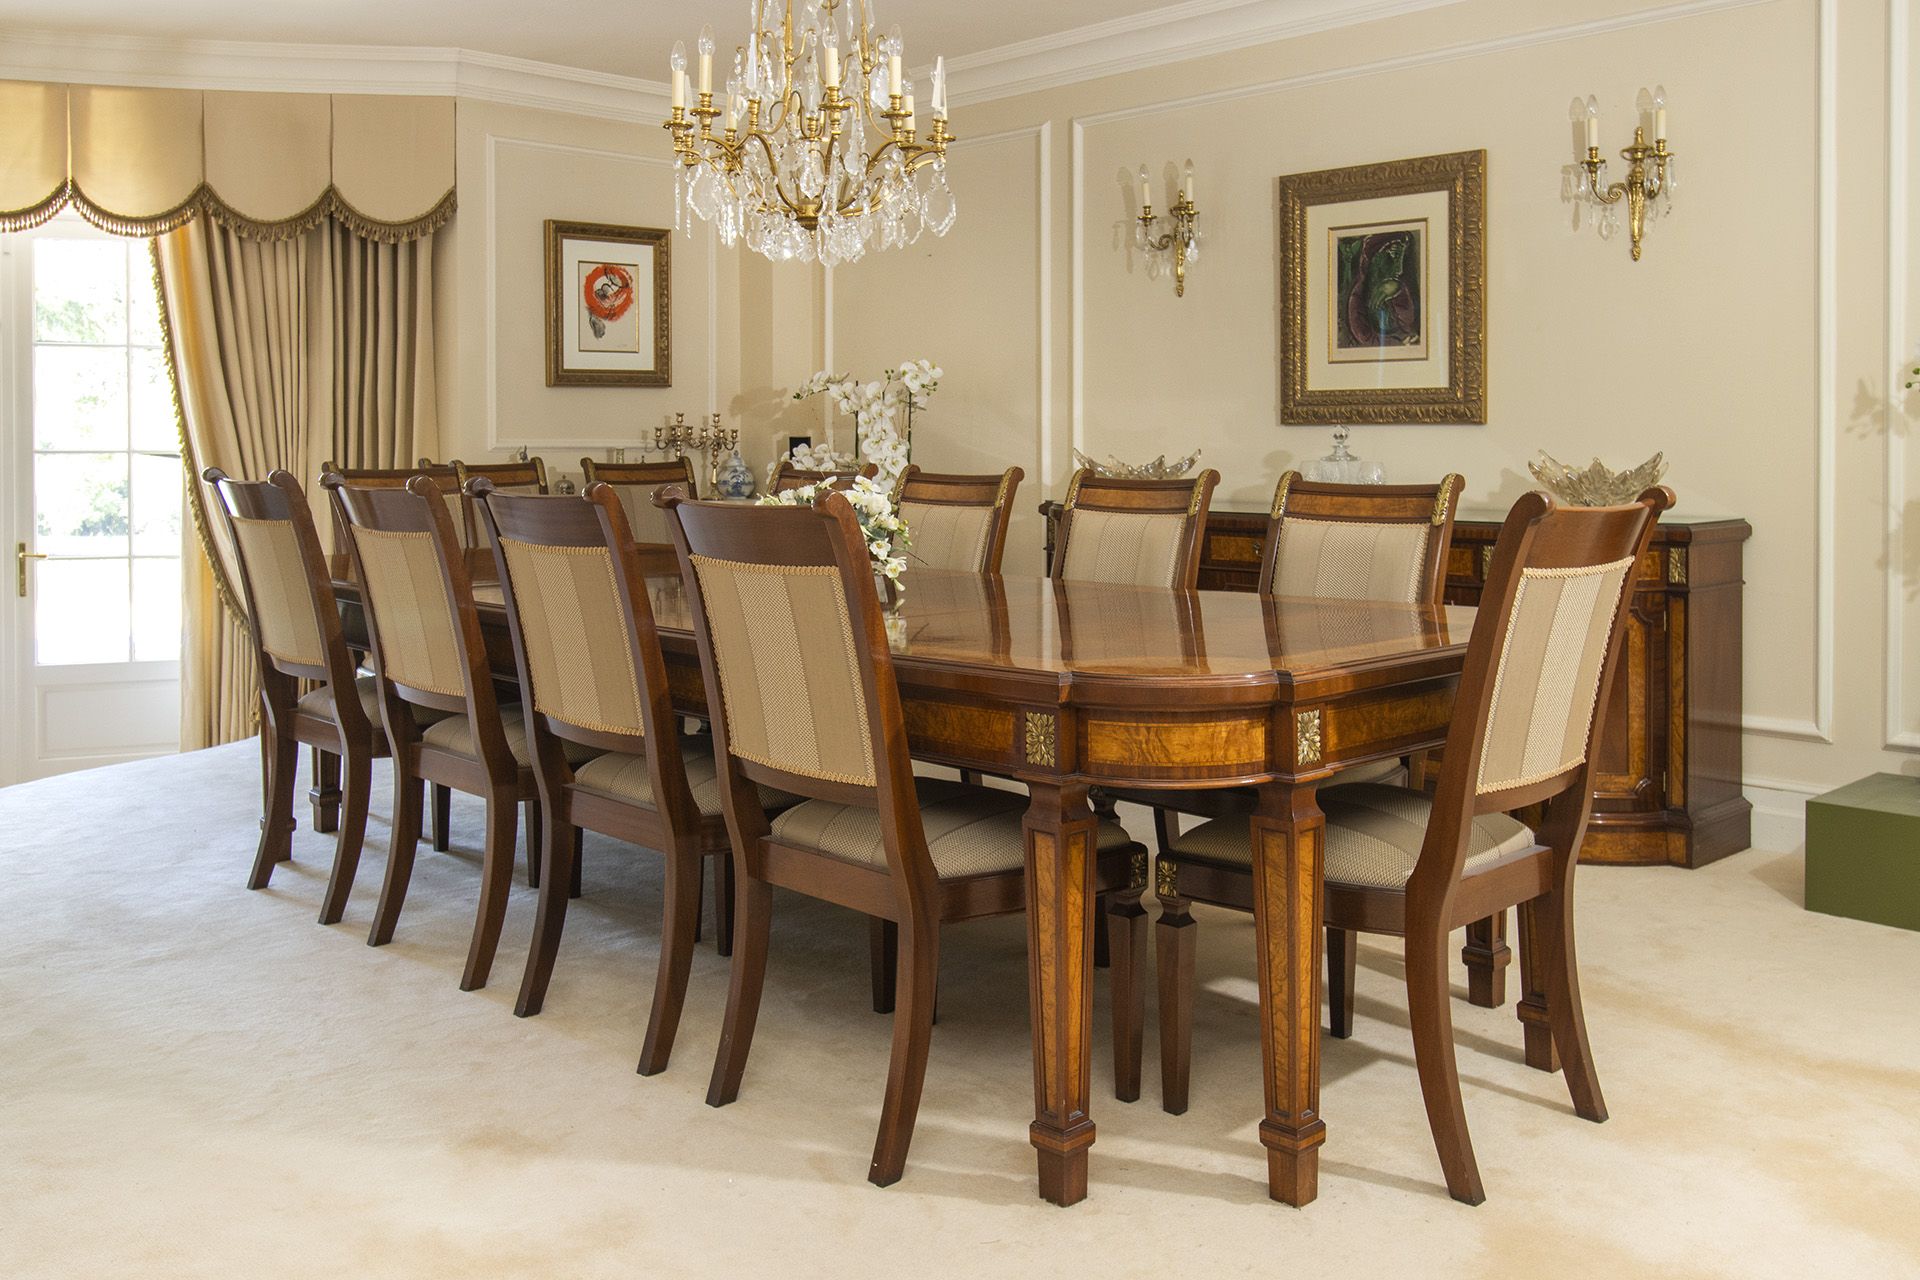 Charles Barr Fine Furniture Regal burr mahogany inlaid dining table complete with 10 x dining chairs - Image 3 of 3